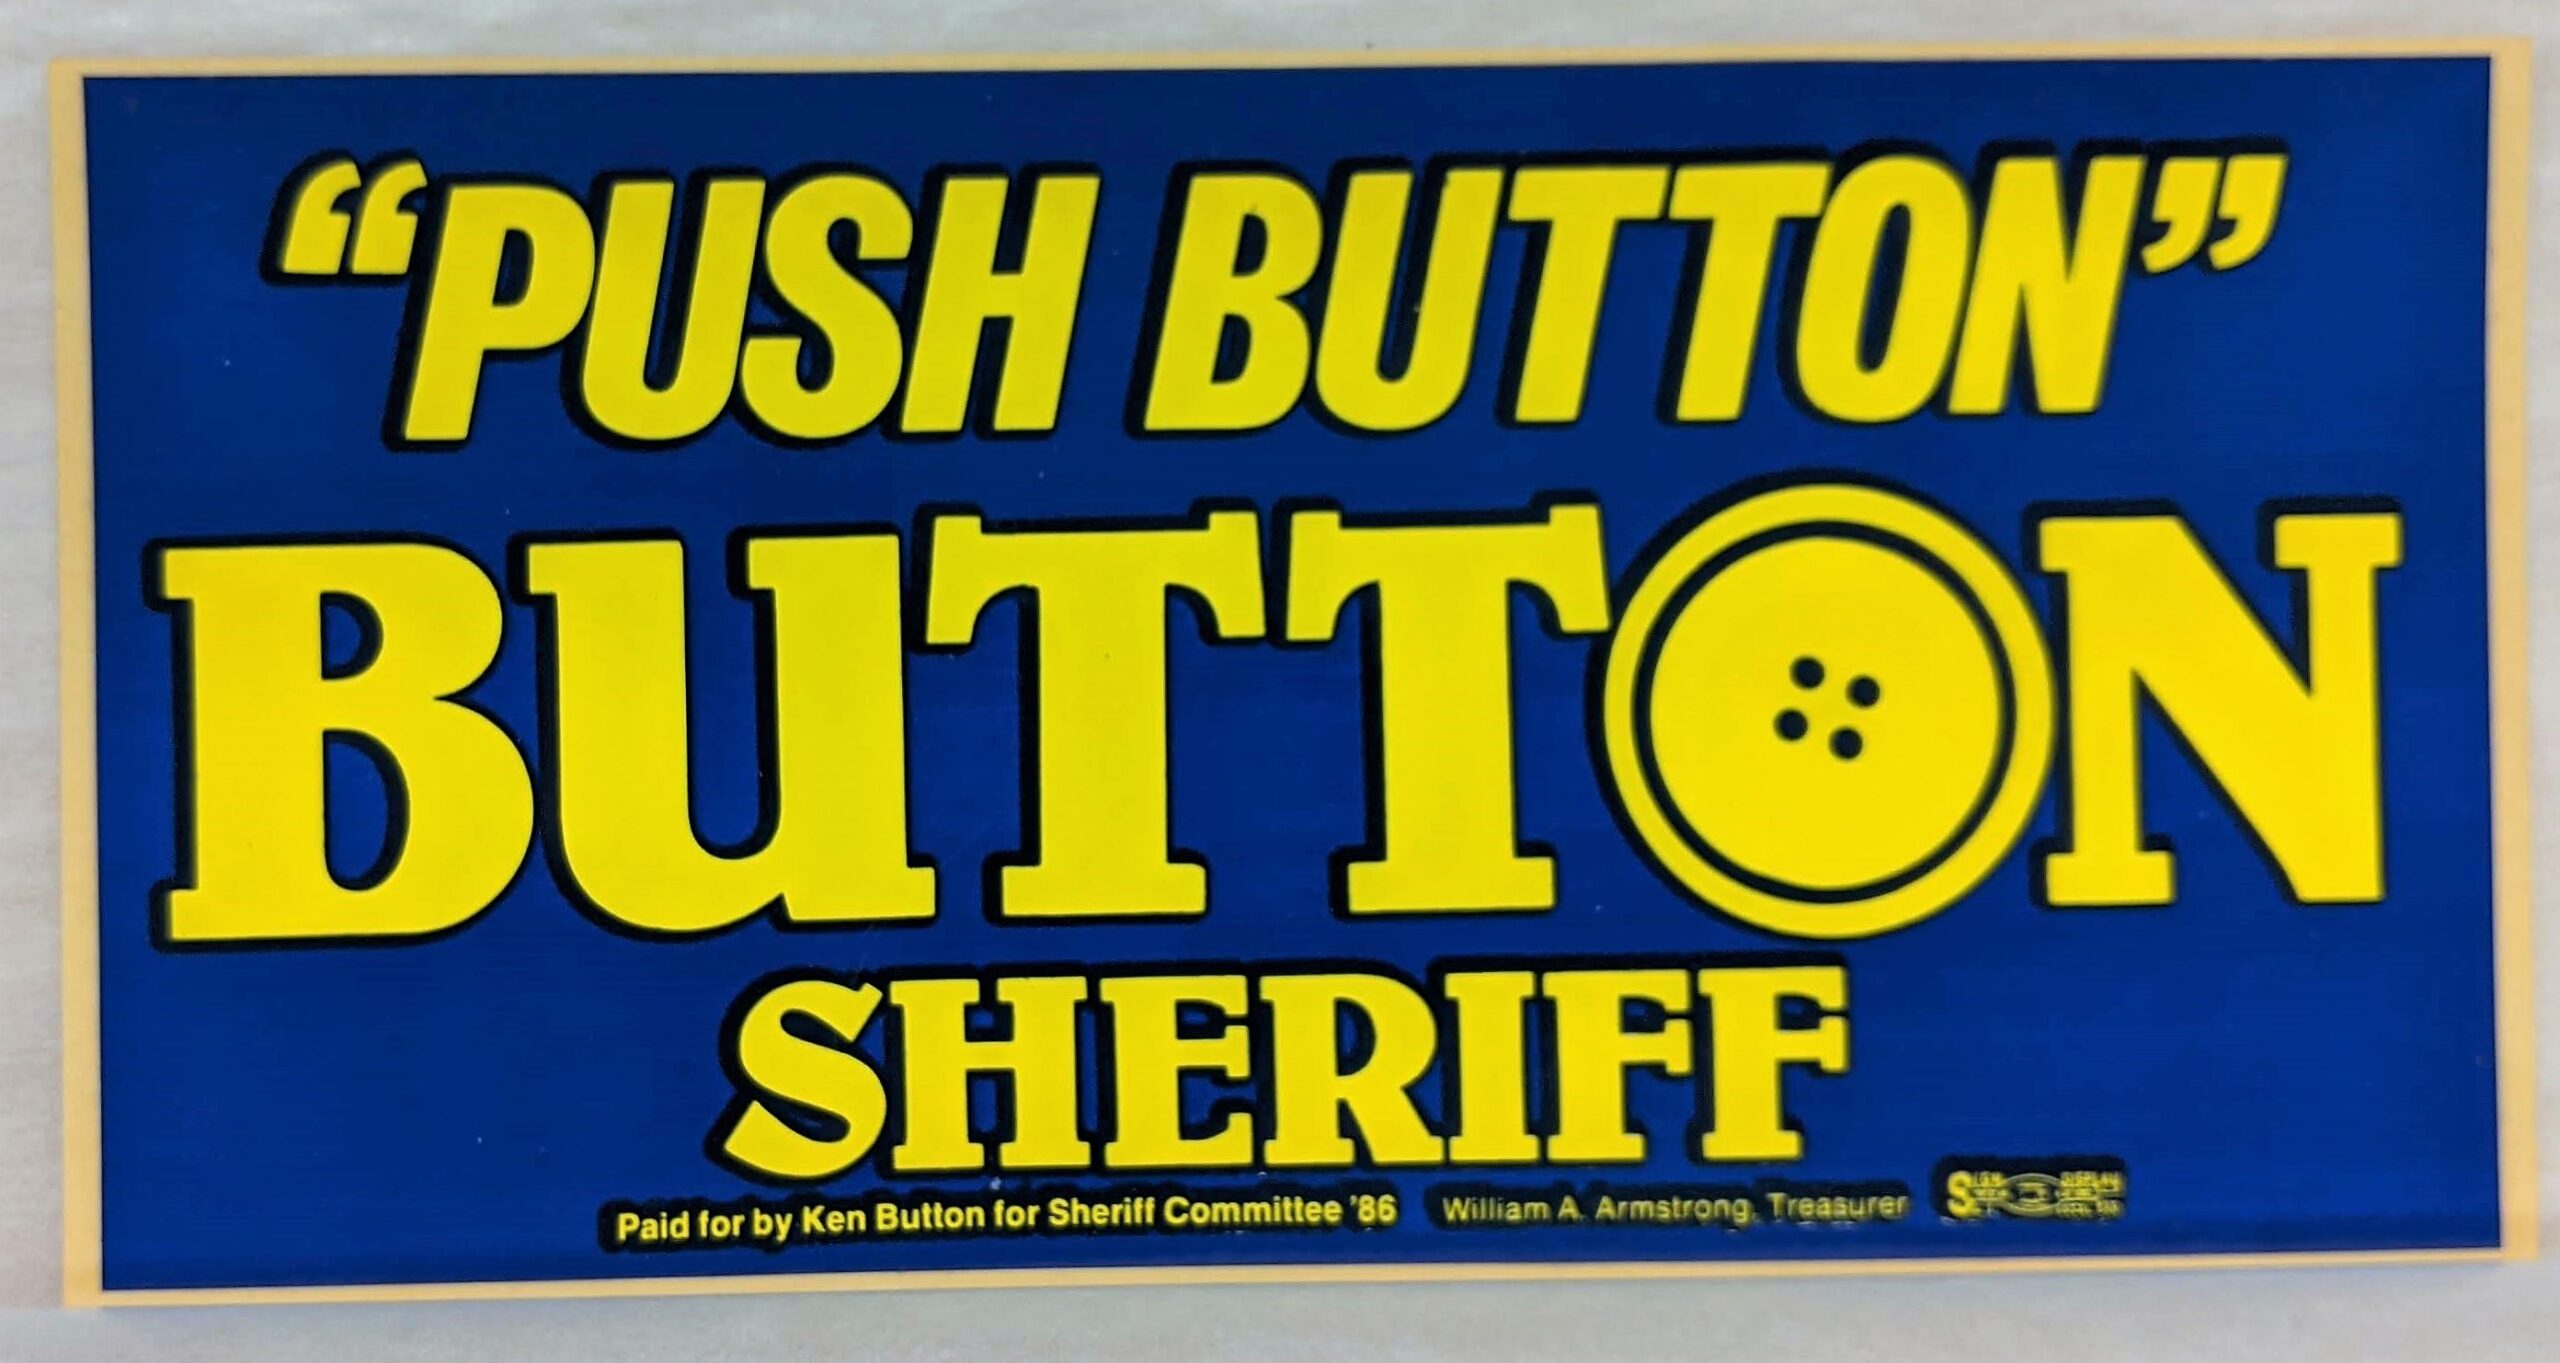 Creator unknown, “‘Push Button’ [Ken] Button for Sheriff” bumper sticker, 1986, from the Jerome O. Herlihy political campaign ephemera collection